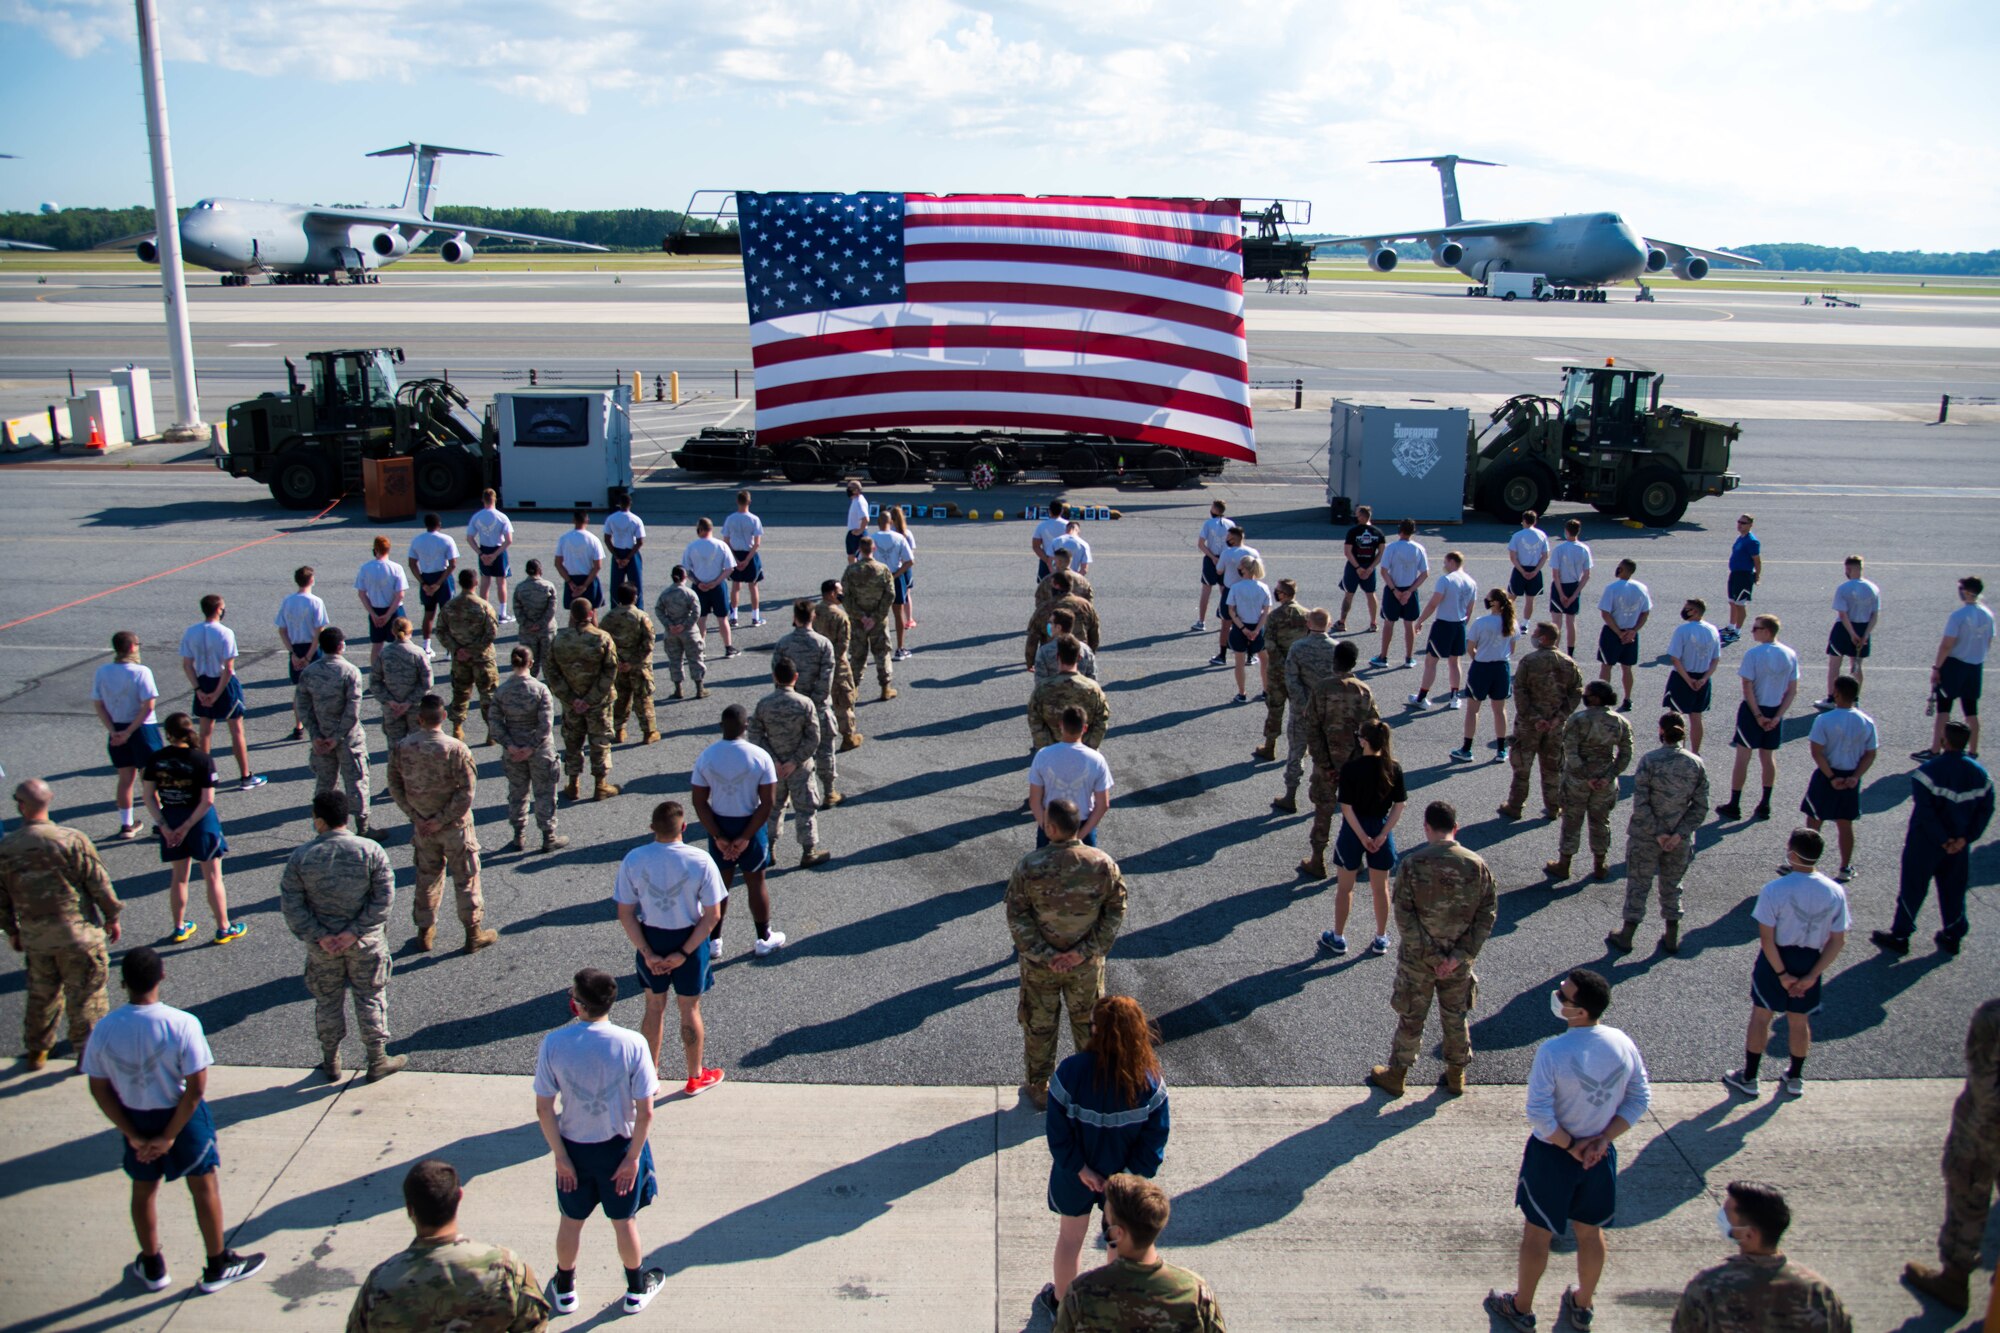 Airmen from the 436th Aerial Port Squadron stand in formation before a memorial ceremony June 29, 2020, at Dover Air Force Base, Delaware. Airmen were required to wear masks and adhere to social distancing regulations. (U.S. Air Force photo by Airman 1st Class Faith Schaefer)